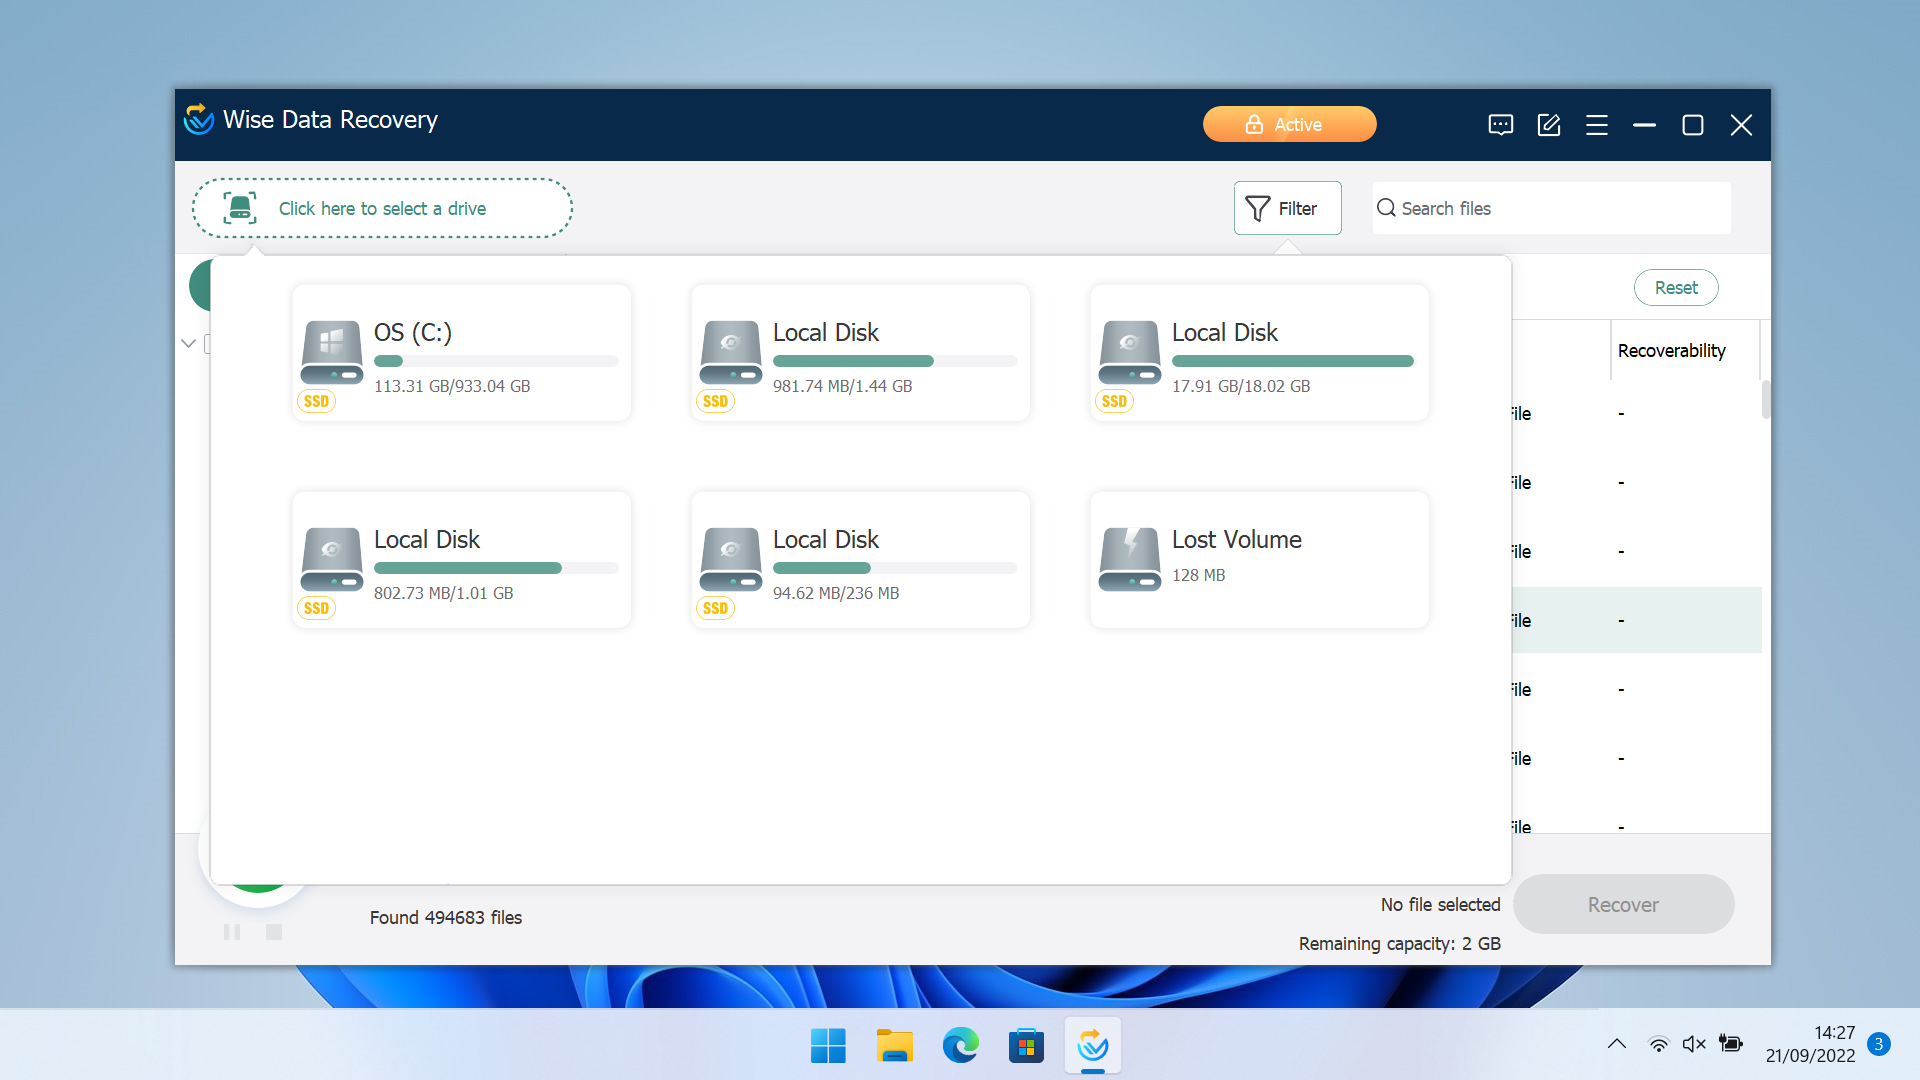 Screenshot of Wise Data Recovery Software and photo recovery tools